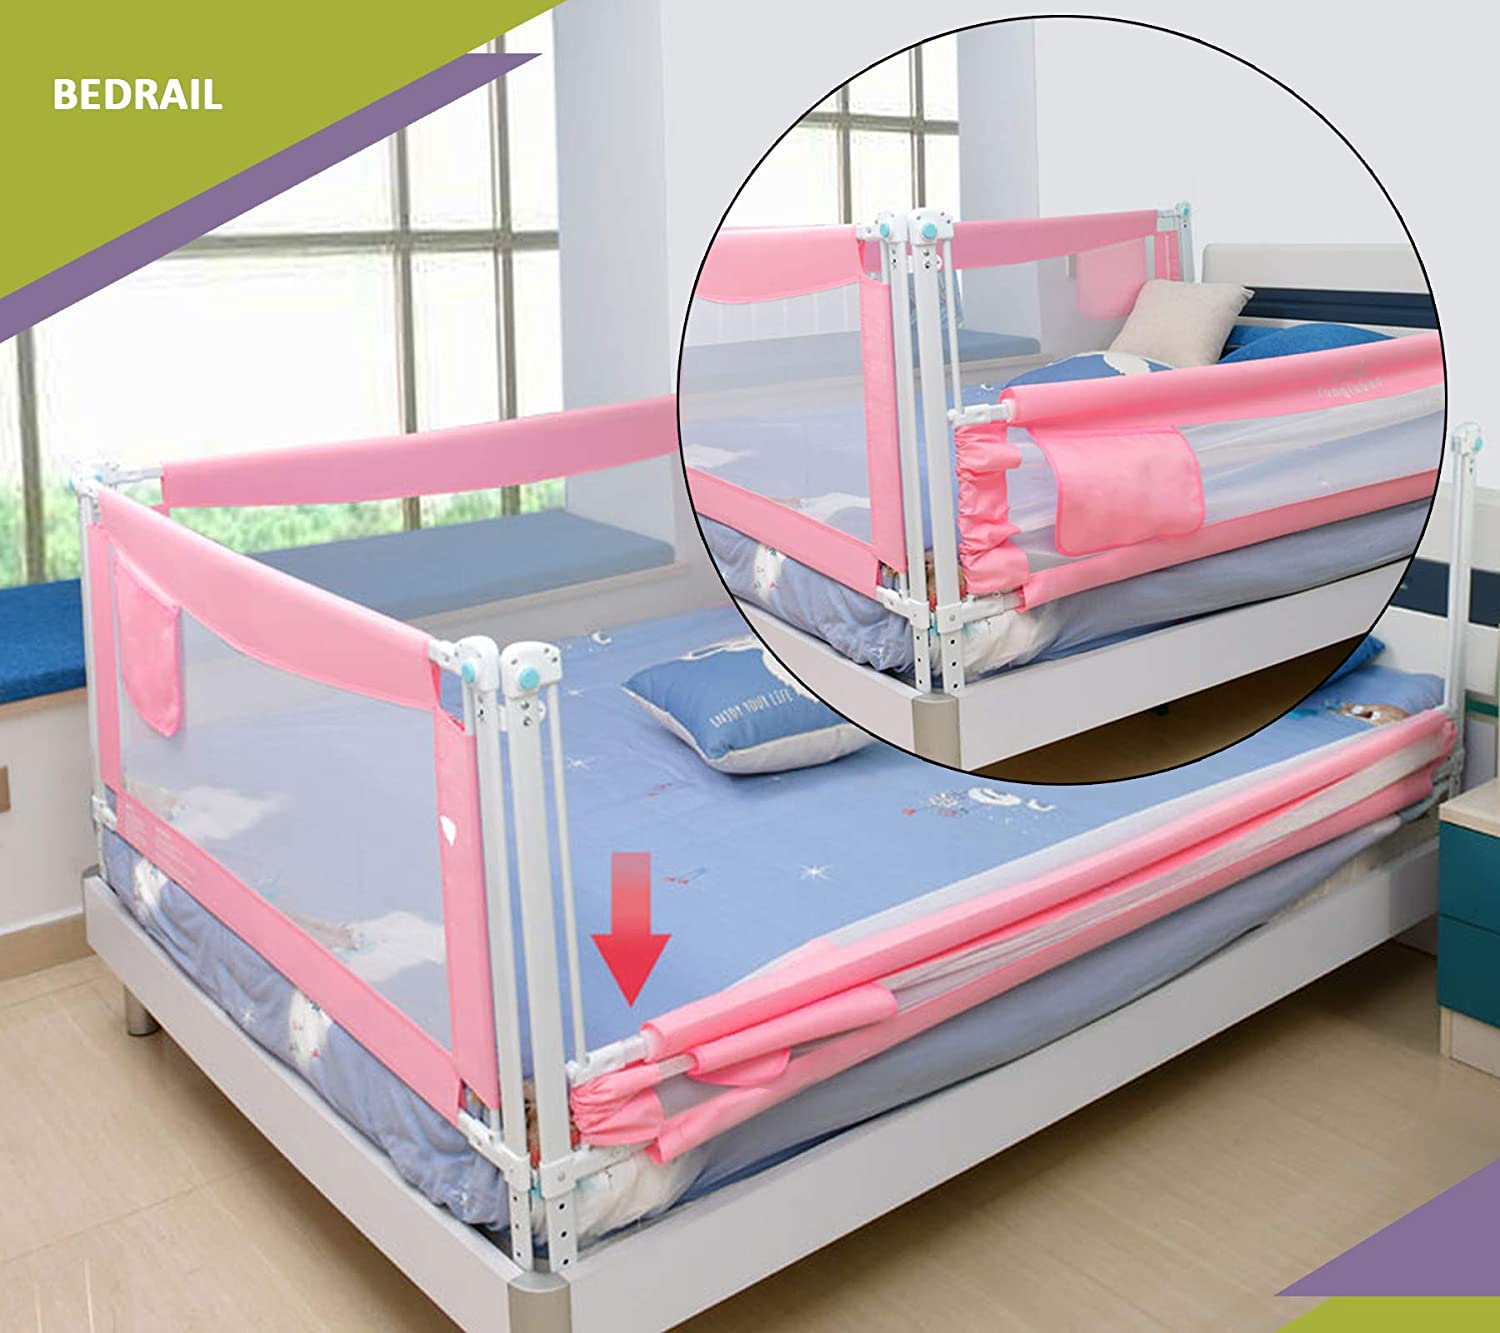 twin matress and safety bed rails